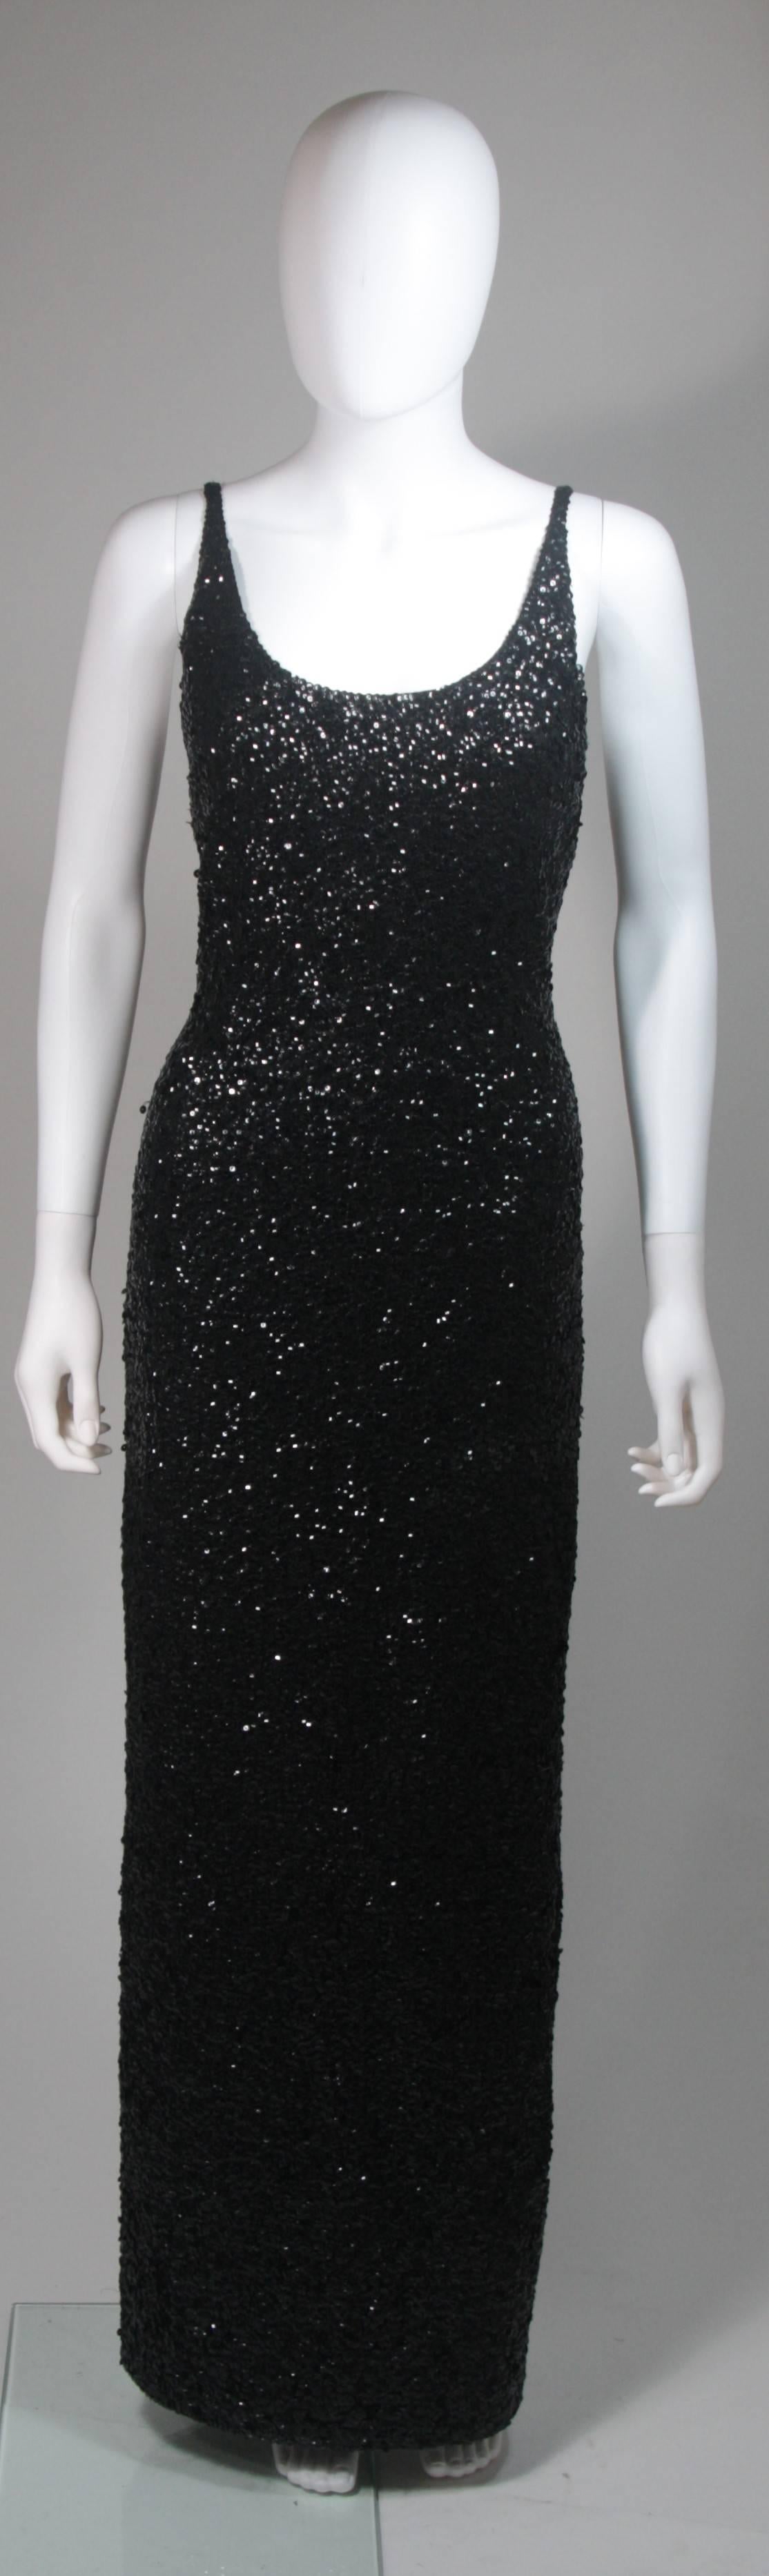 This Gene Shelly gown is composed of a black stretch knit wool with hand applique black sequins throughout. This stunning design strap design gown has a center back zipper. Made in Hong Kong. In excellent vintage condition.

**Please